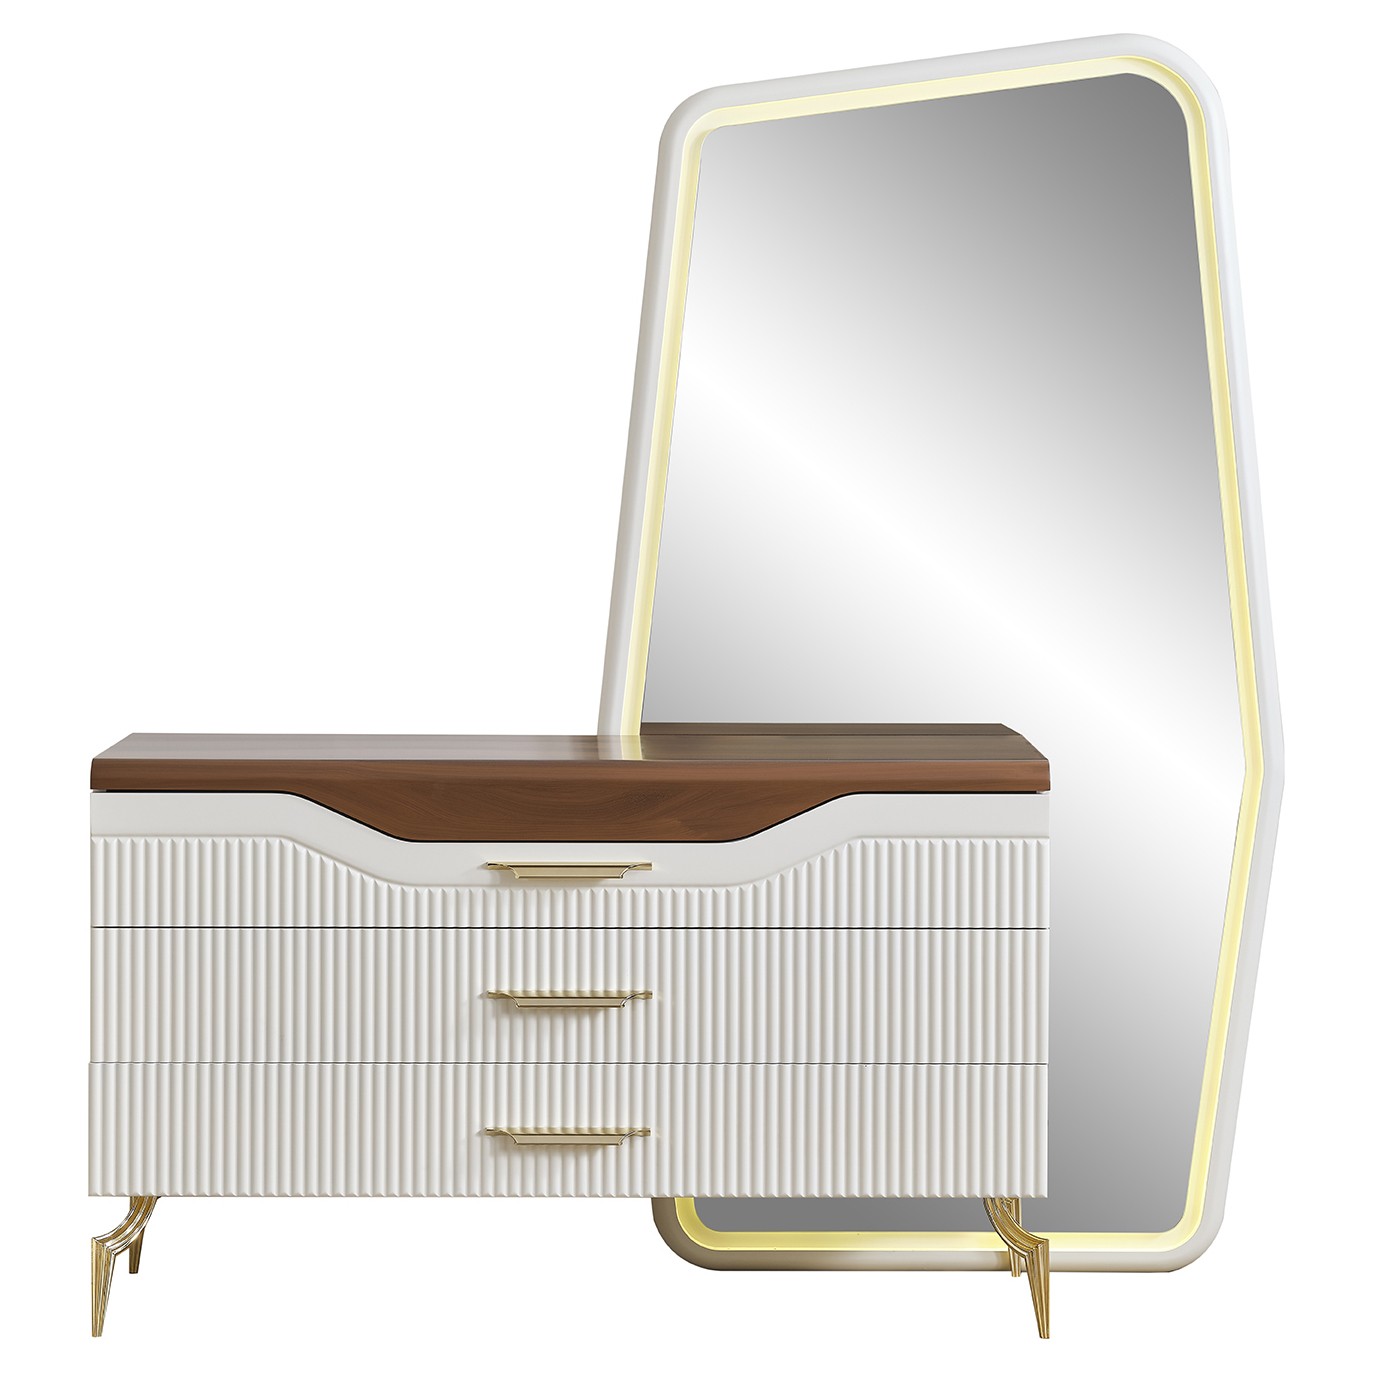 Style Hermes Vol1 Dresser With Mirror